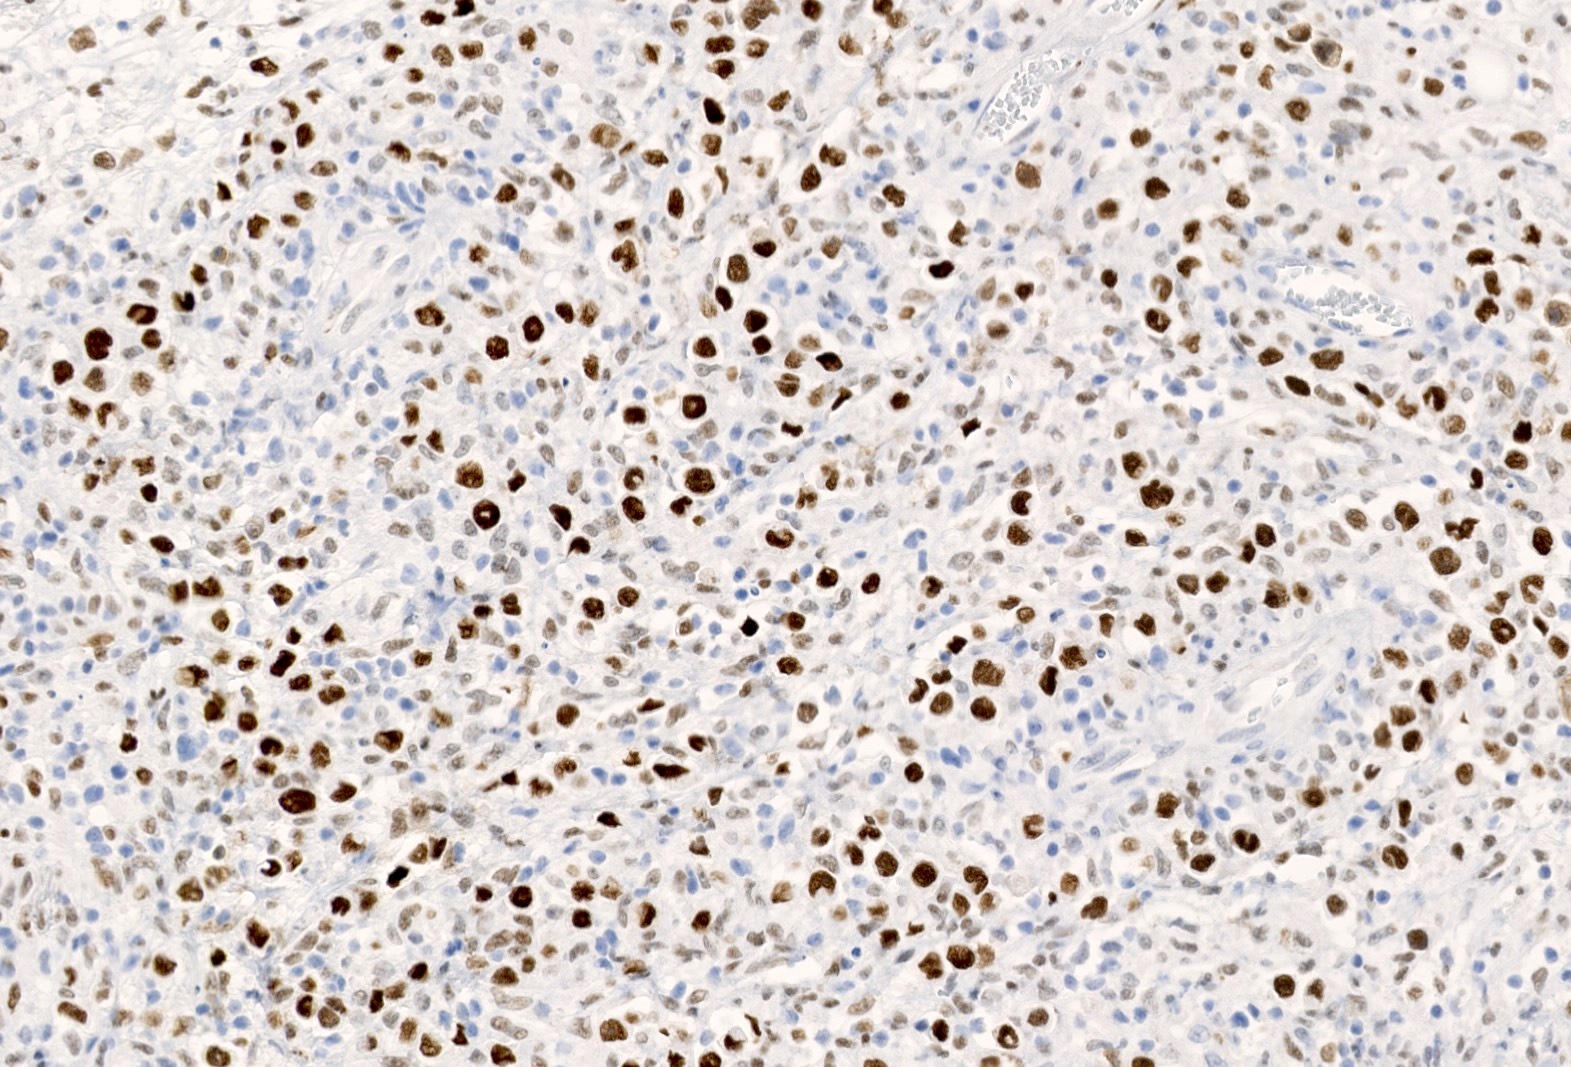 T cell / histiocyte rich large B cell lymphoma (H&E and BCL6)